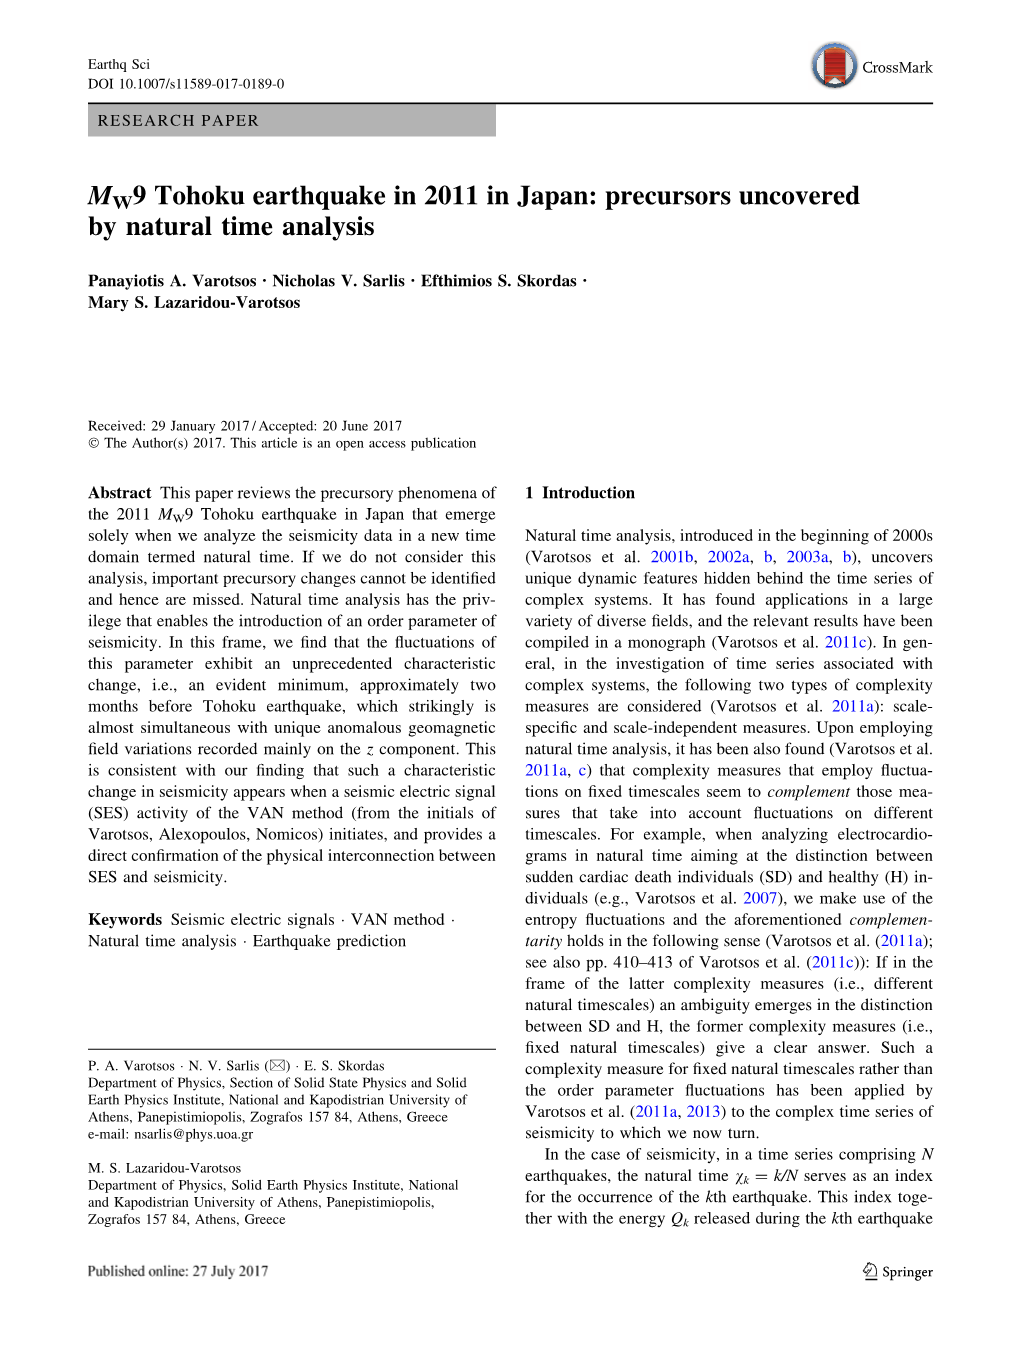 MW9 Tohoku Earthquake in 2011 in Japan: Precursors Uncovered by Natural Time Analysis